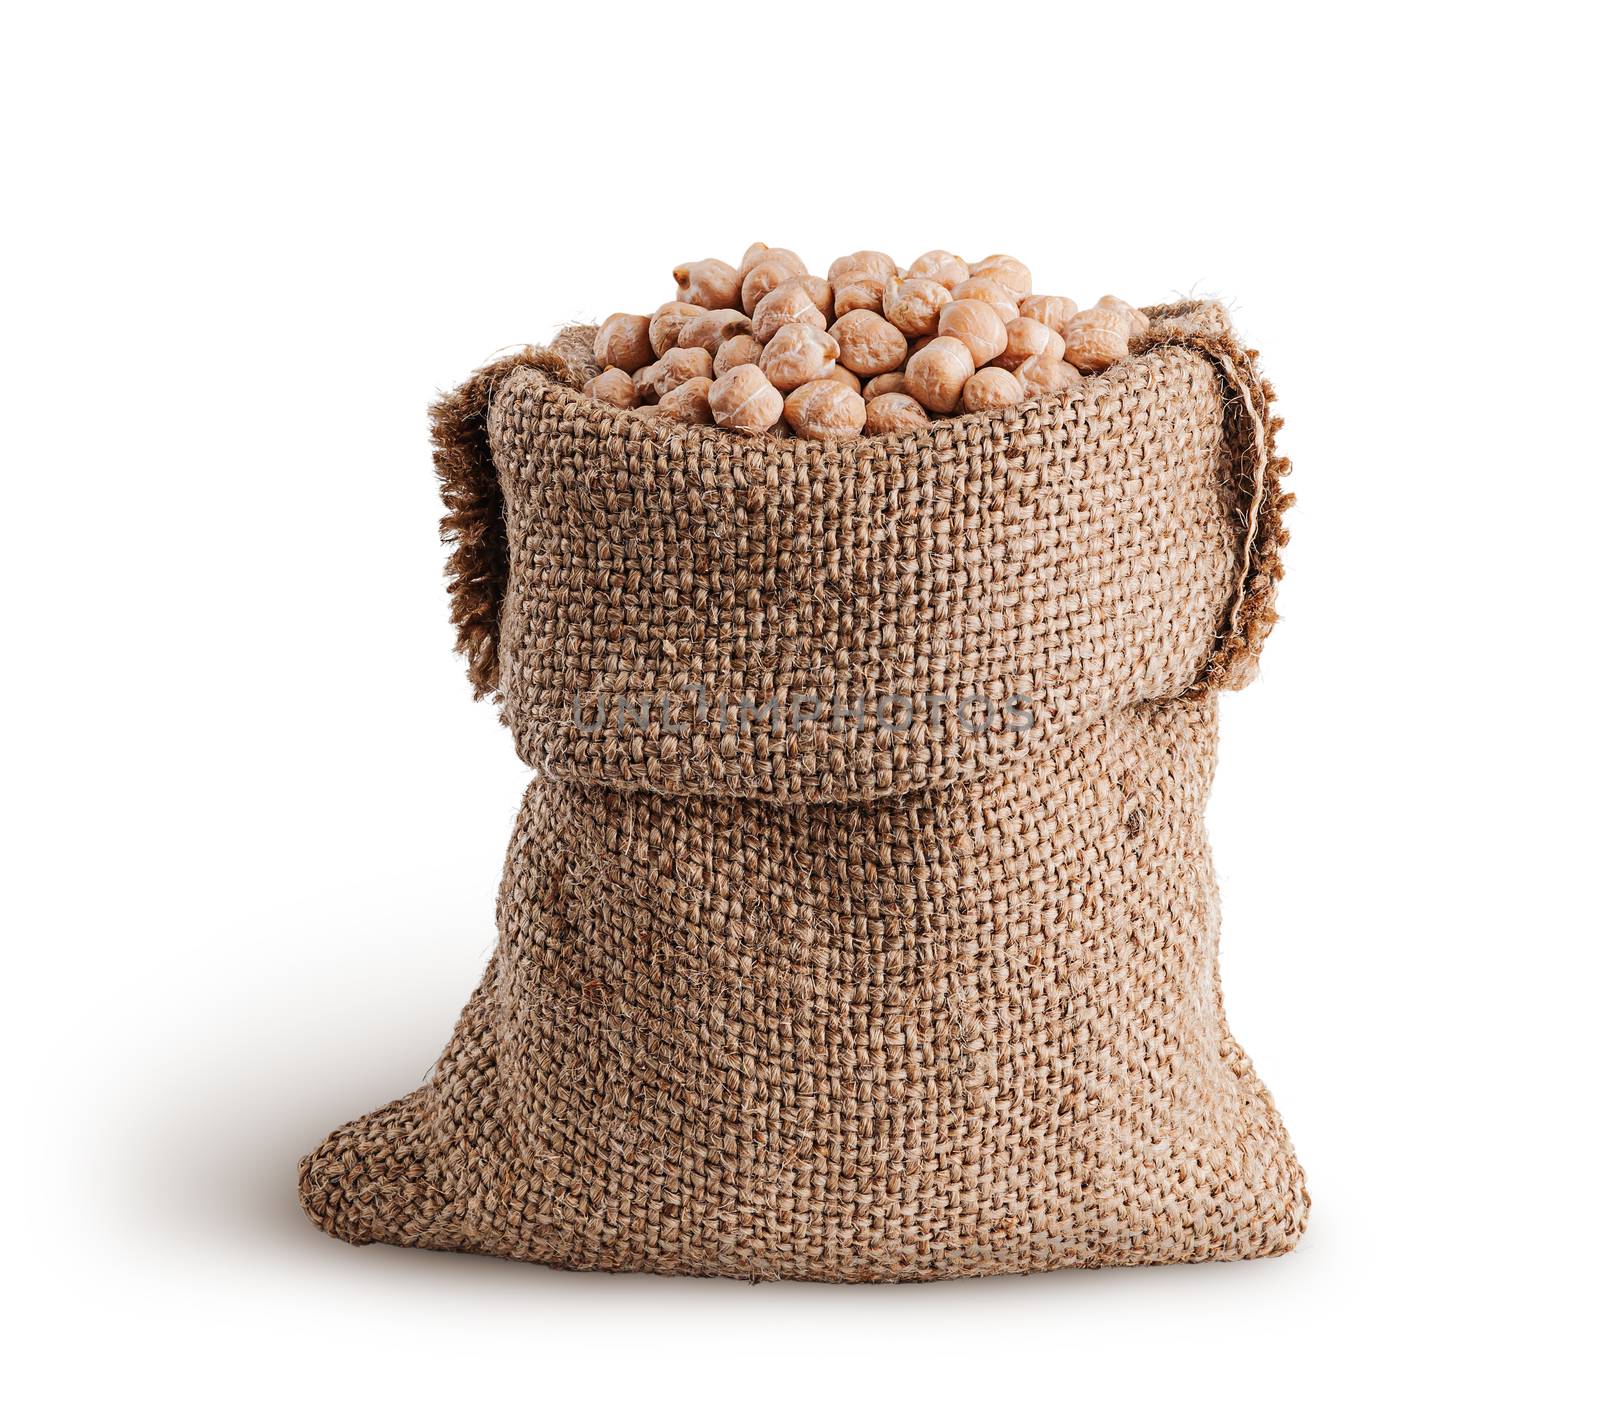 Dry chickpeas in a sack by Cipariss